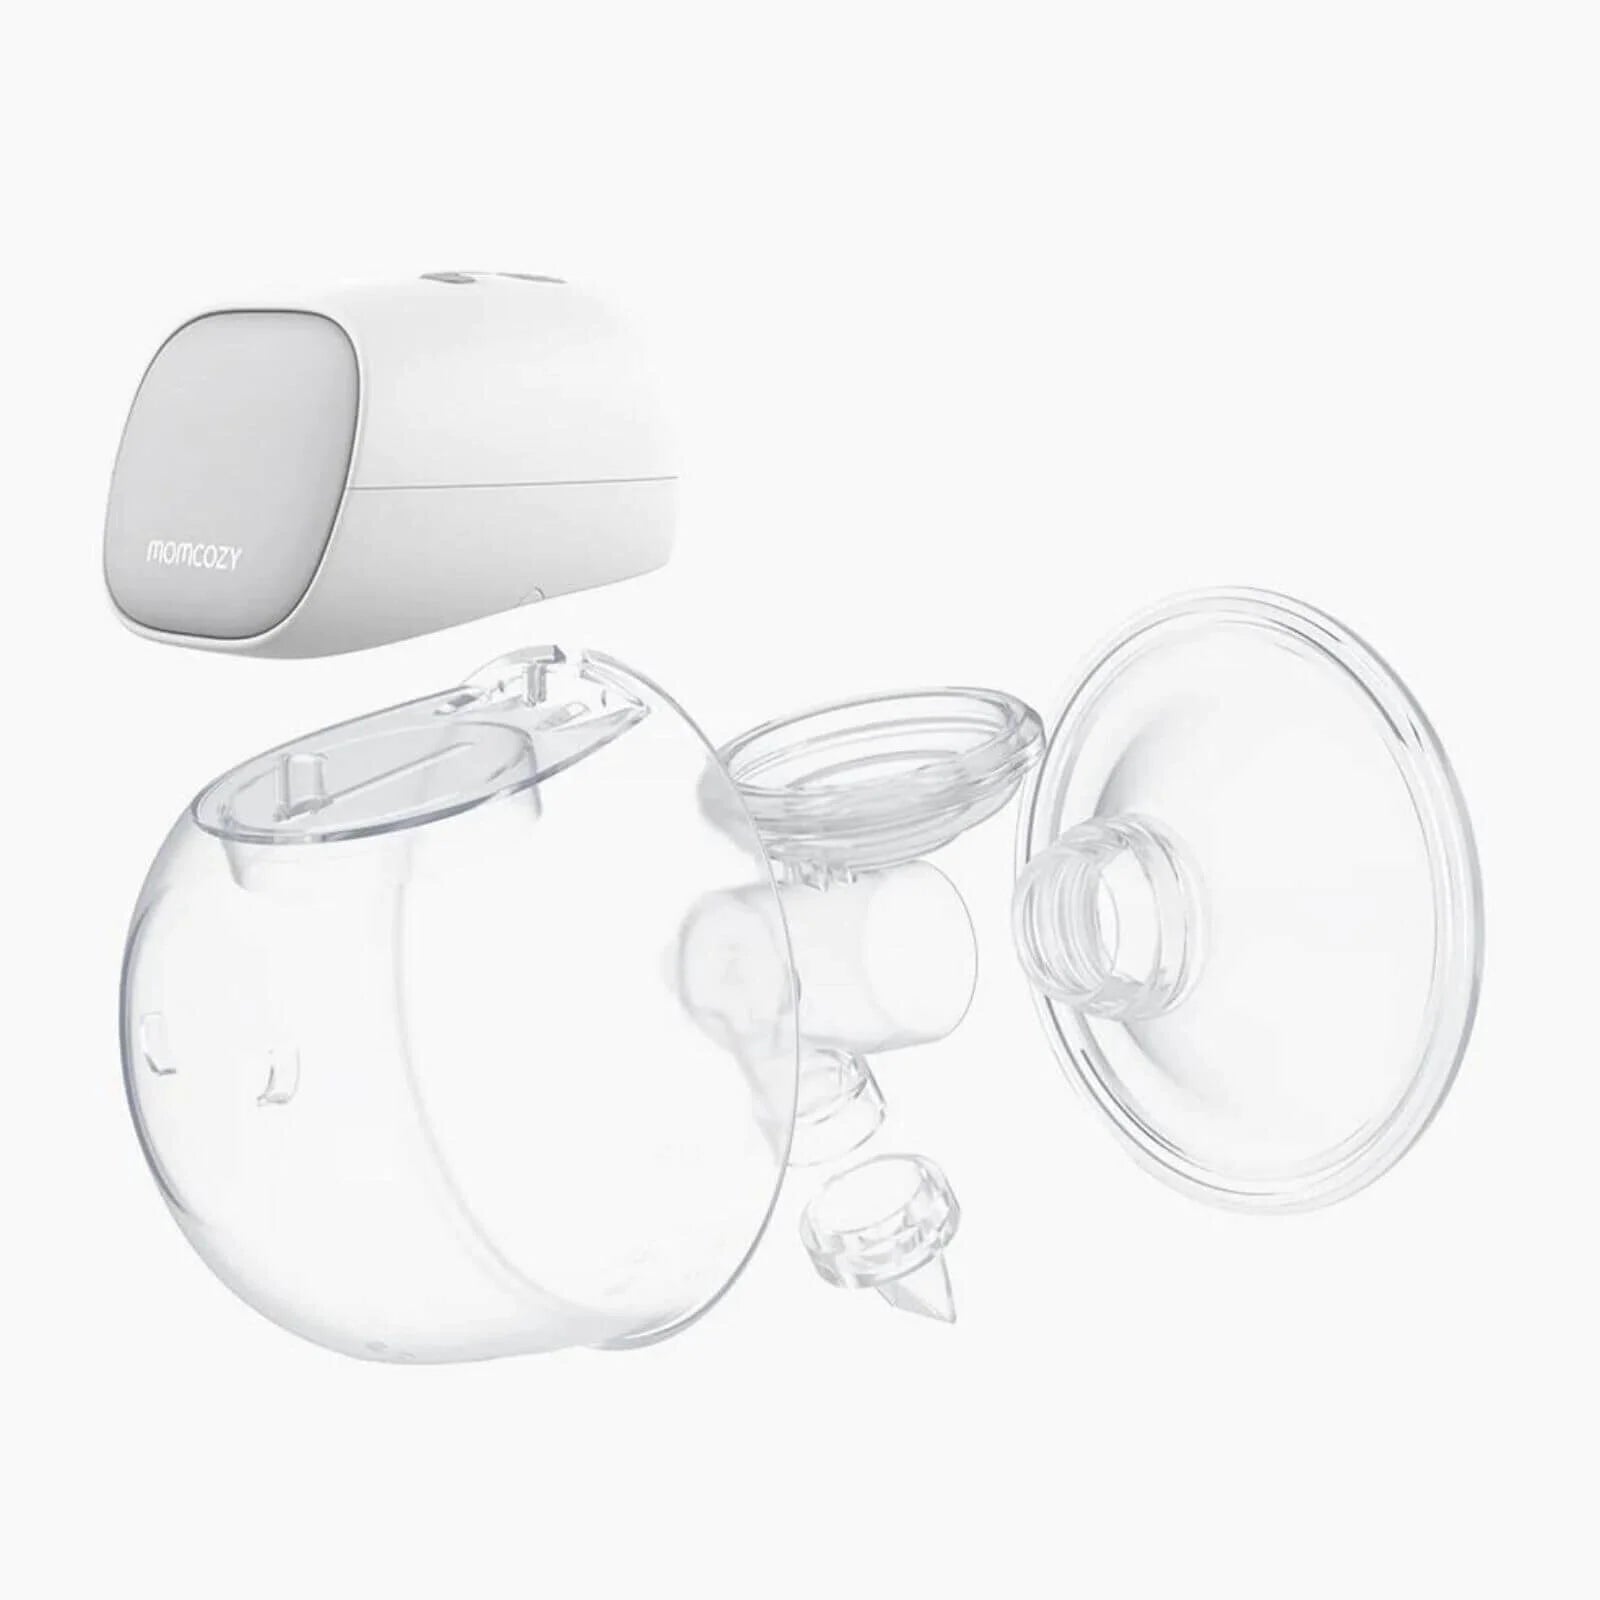 Momcozy S9 Pro Hands Free Breast Pump, Wearable Electric Breast Pump 24mm